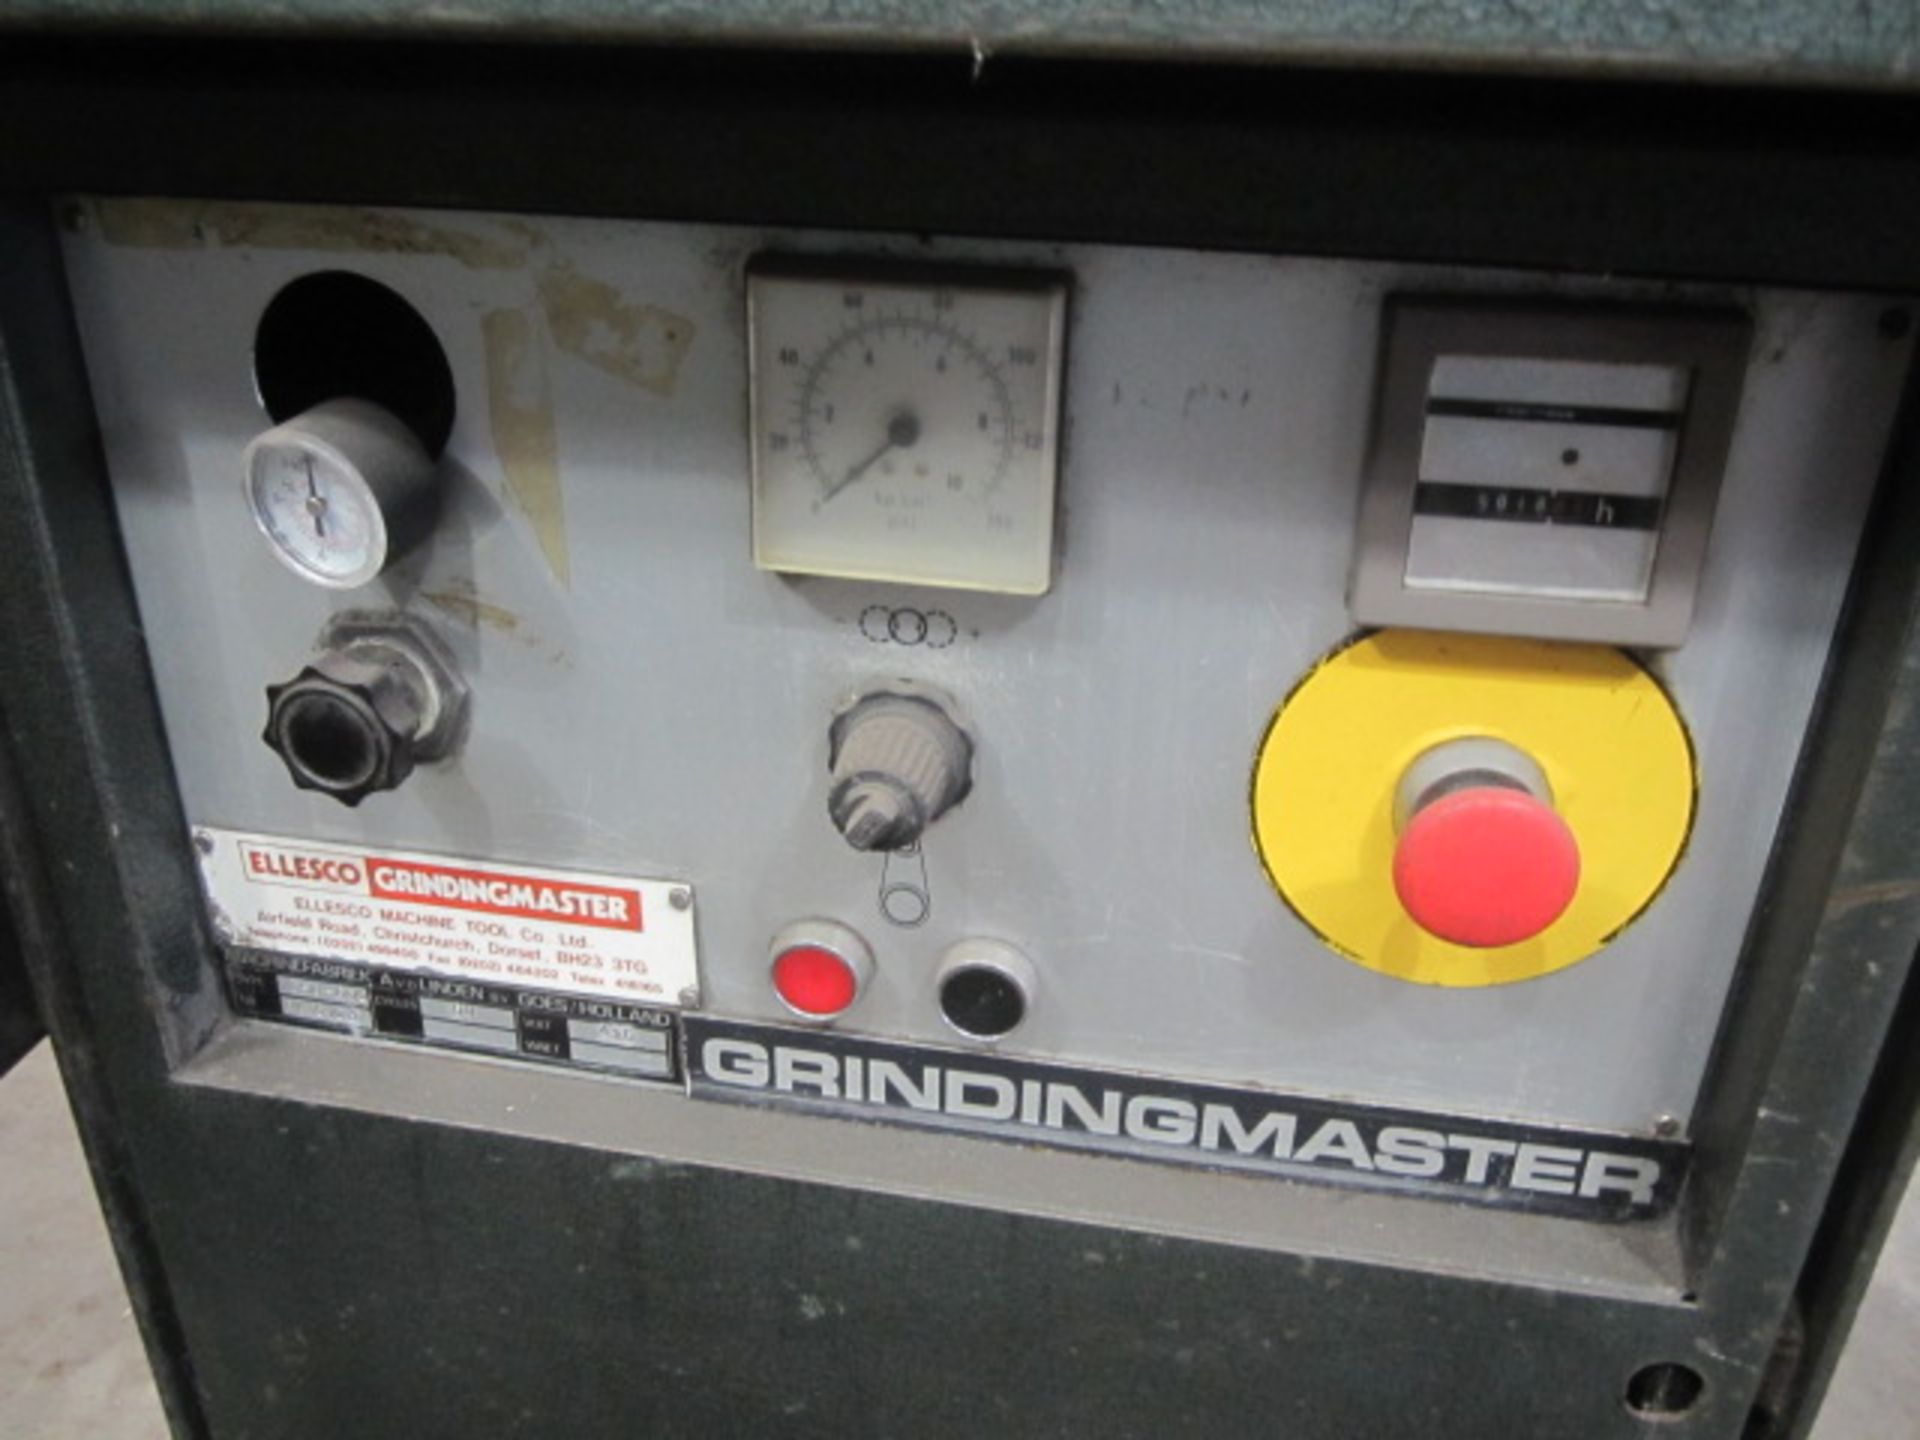 Grinding Master 600mm through feed belt sander, type MCSB-600, serial no. R15103 - for spares or - Image 5 of 7